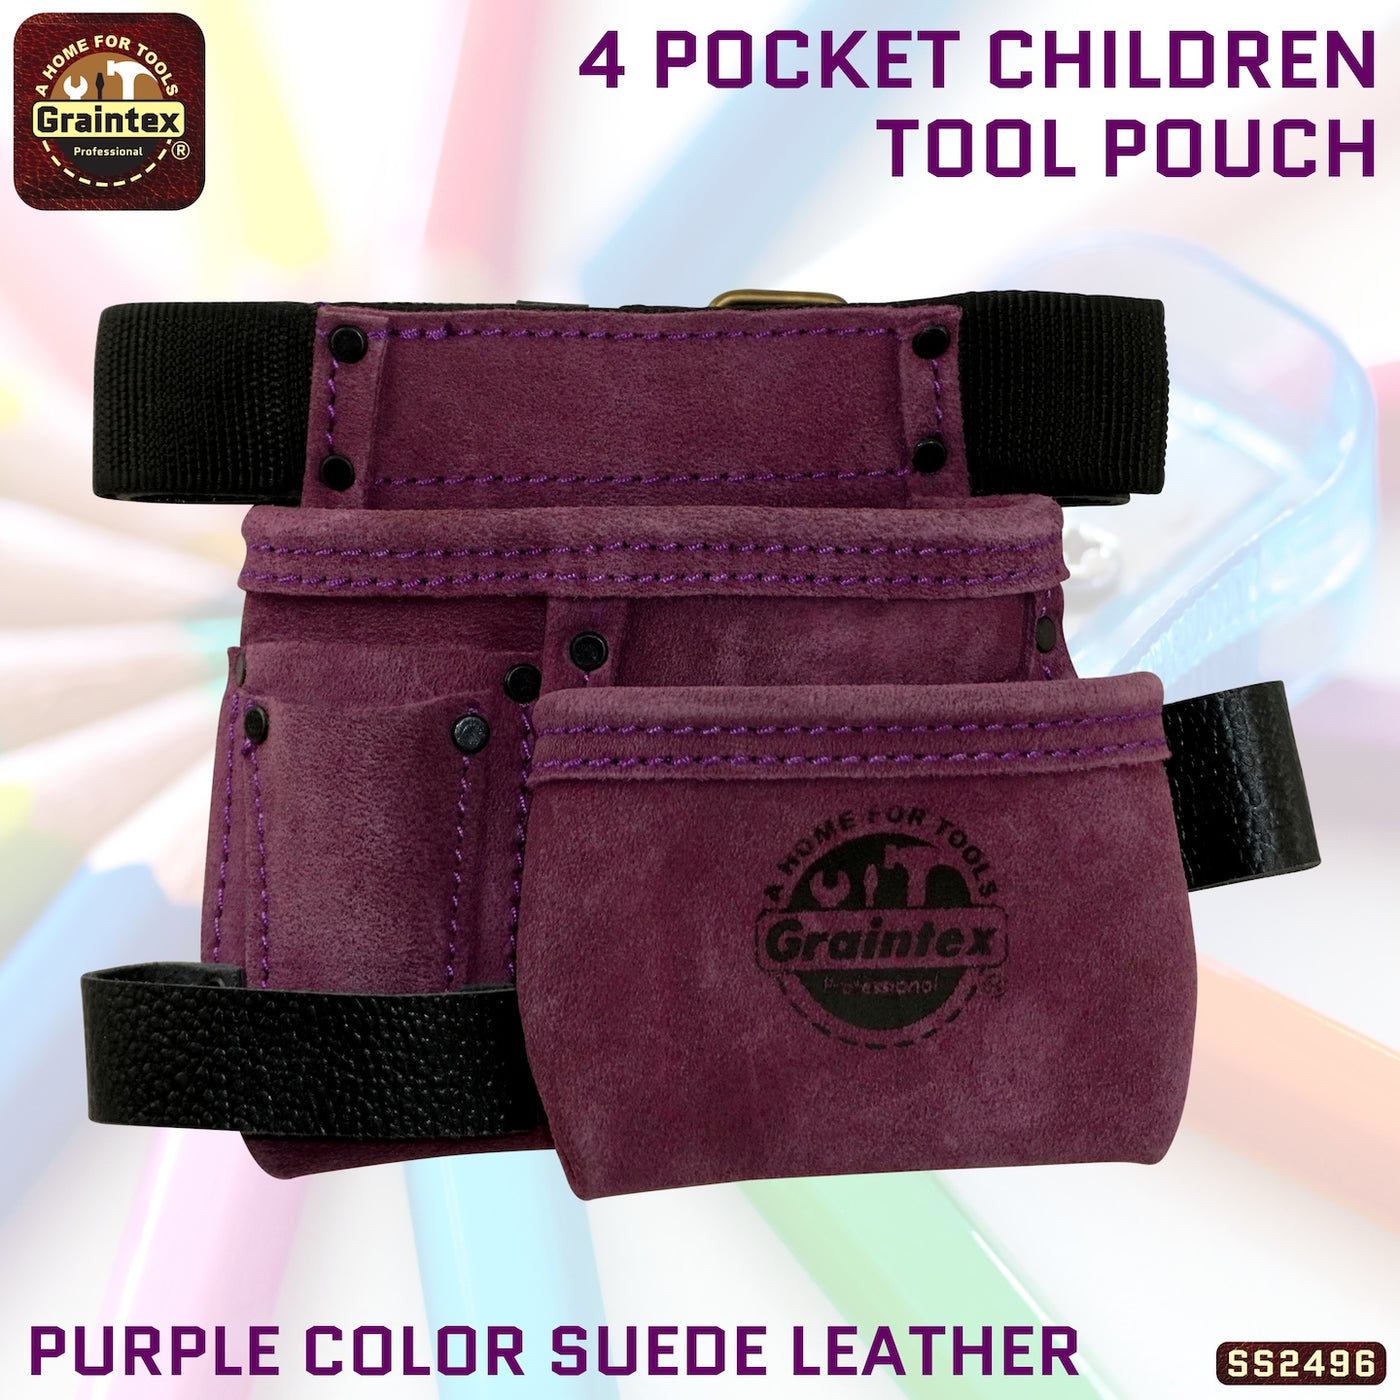 SS2496 :: 4 Pocket Children Tool Pouch Purple Color Suede Leather